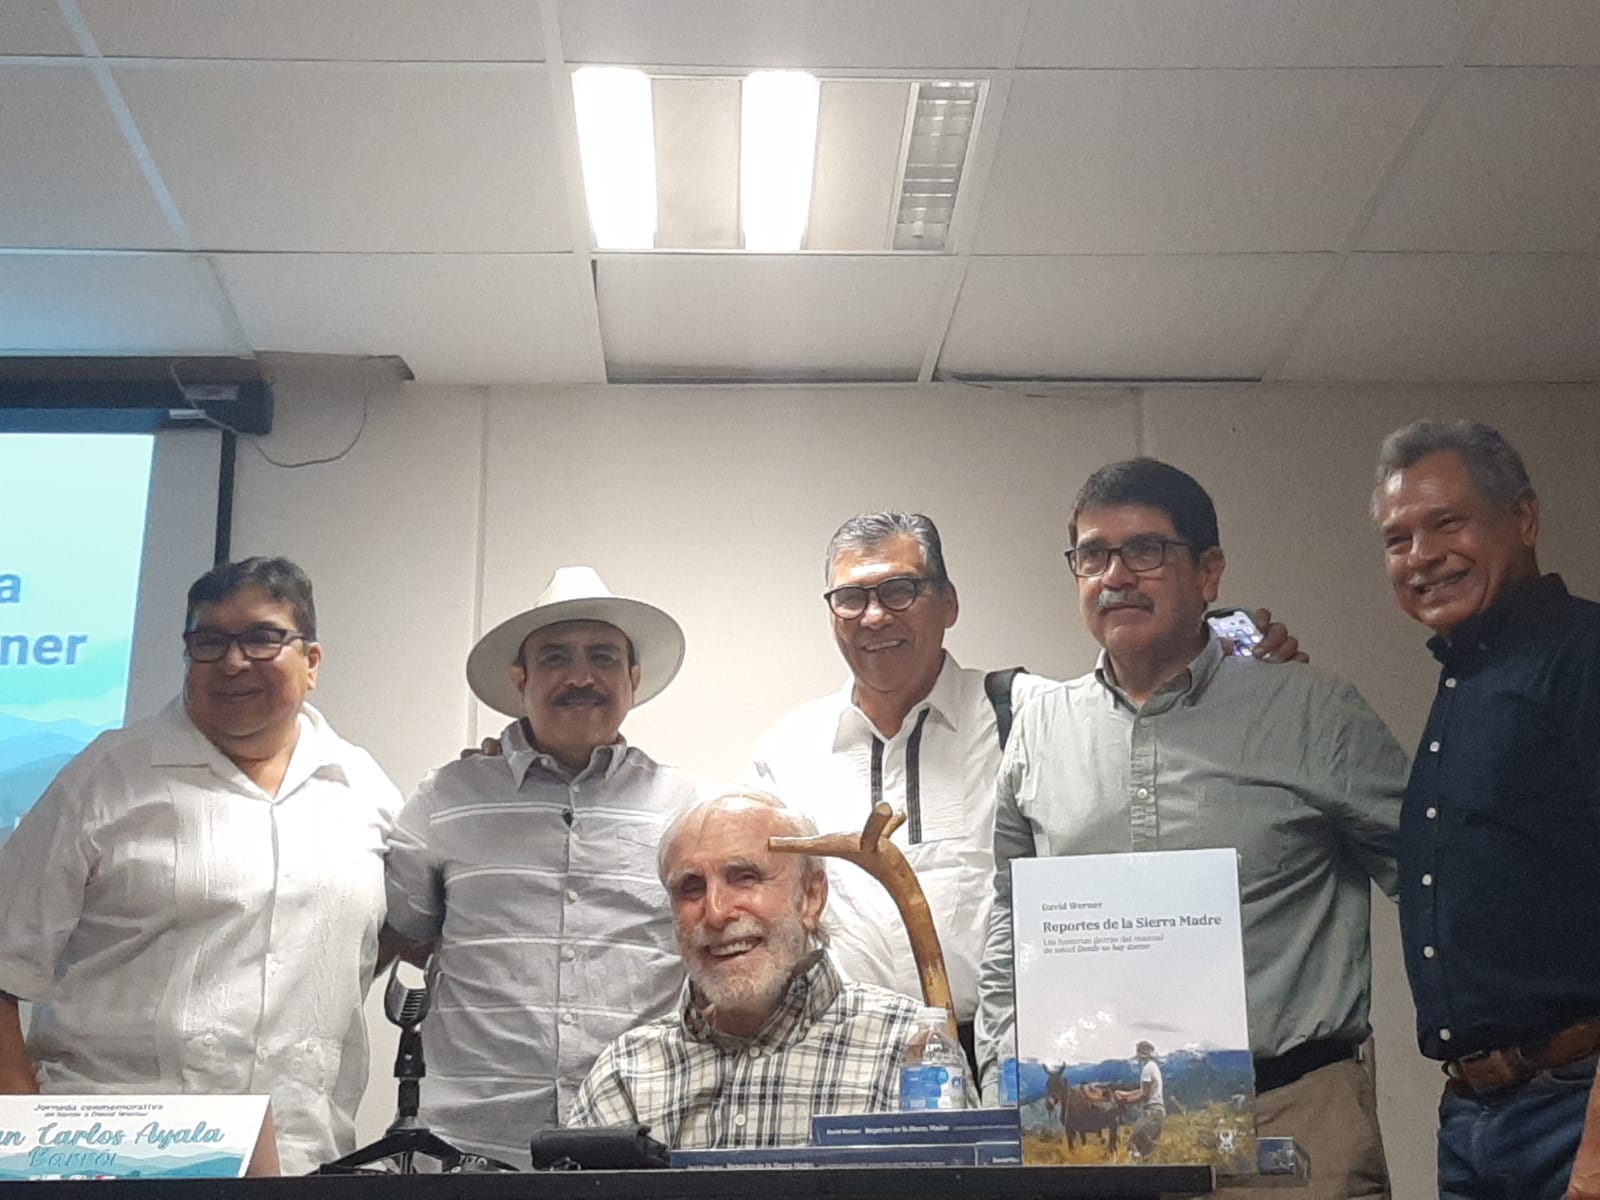 At the June 19 roundtable event the guest speakers (left to right) were Mario Carranza, Genaro Ocio, Ernesto Hernandez Norzagaray, and Martín Lamarque, with Juan Carlos Ayala, moderator (on the right).